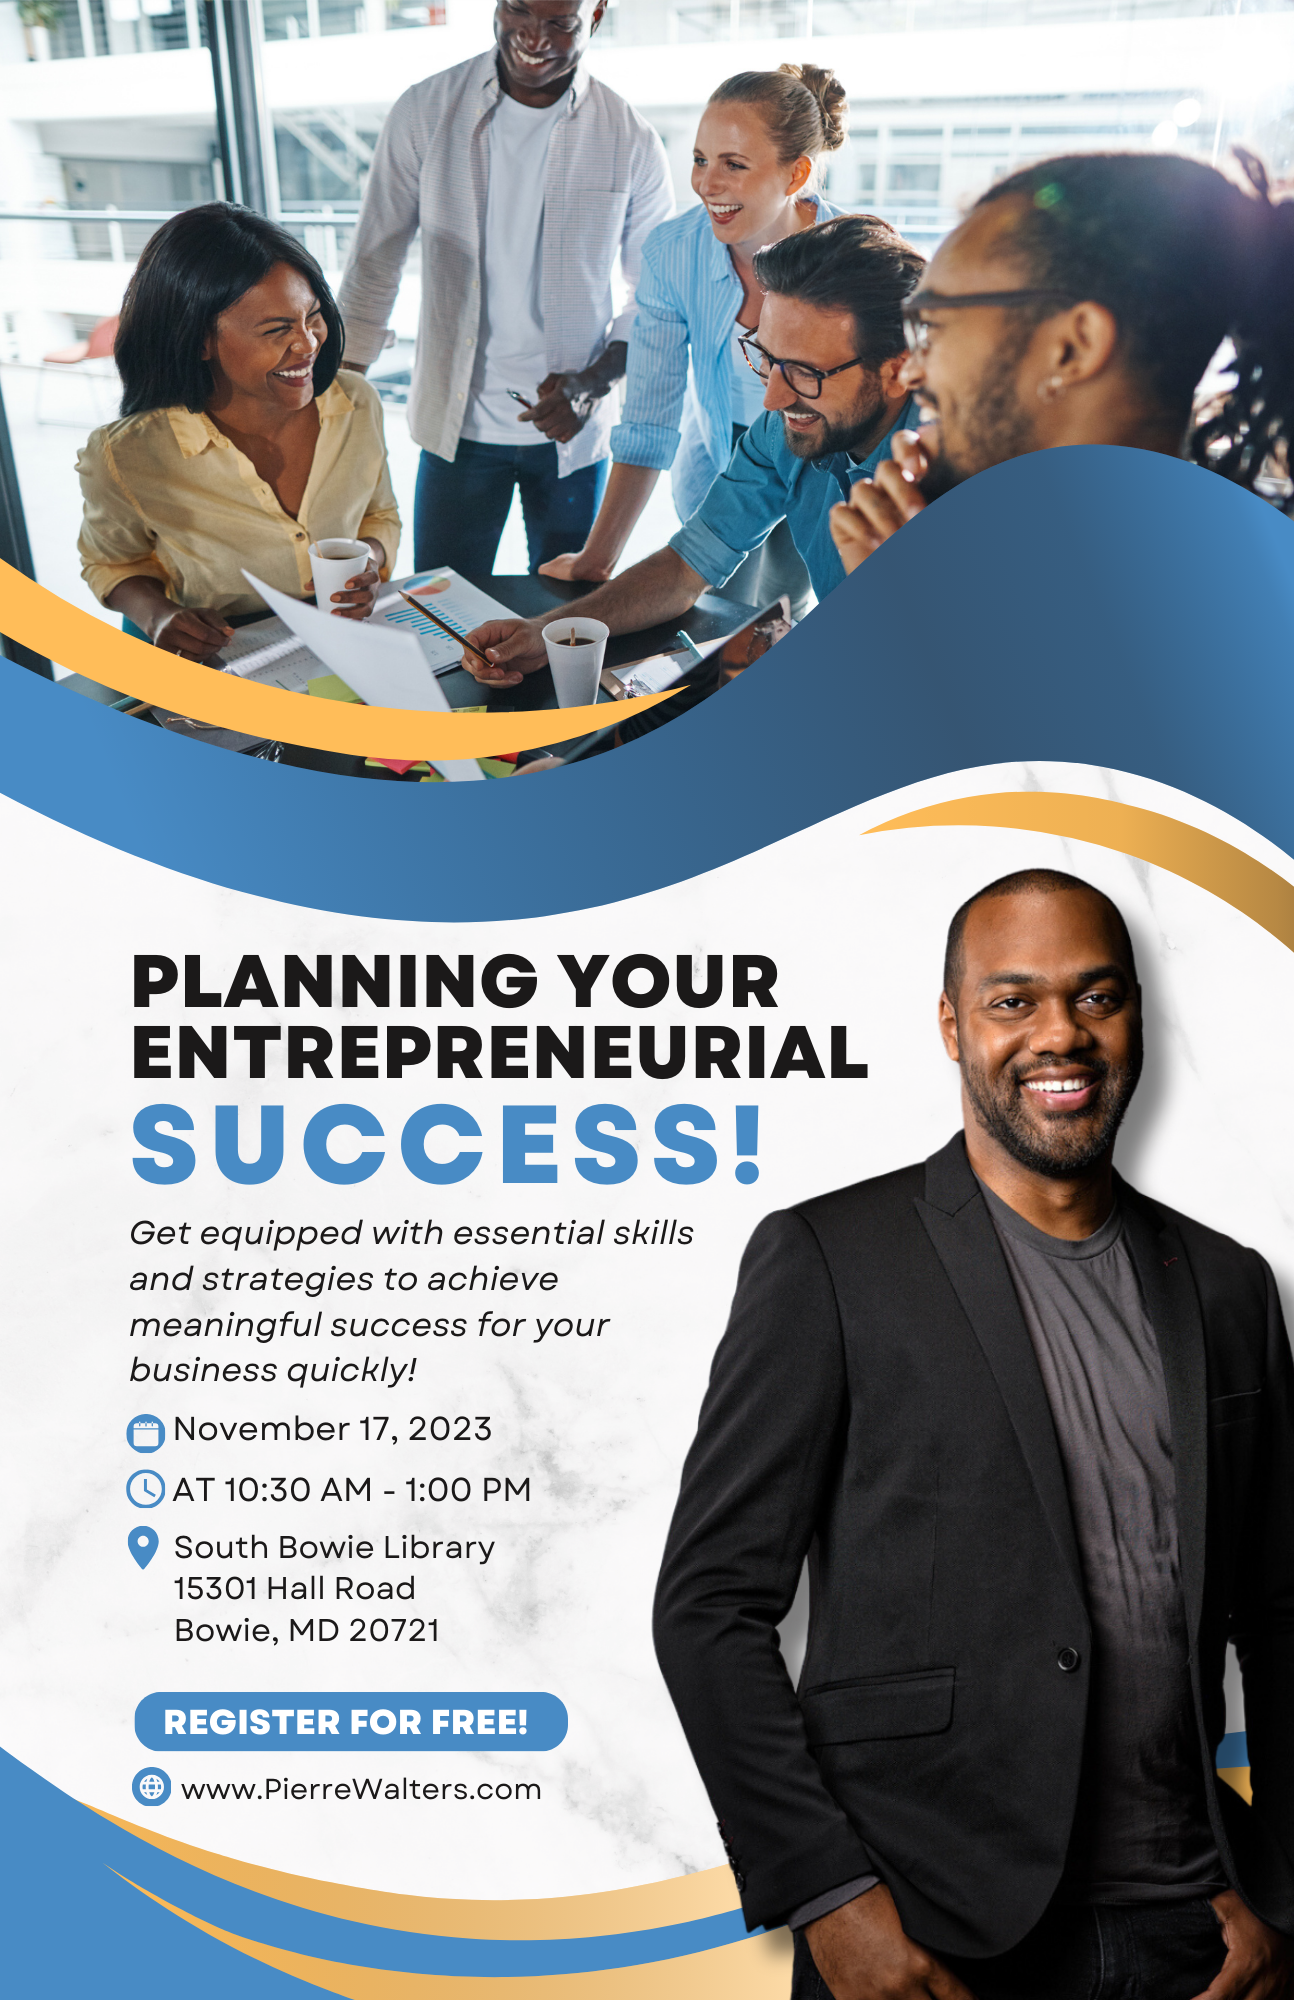 Renowned Entrepreneur Pierre Walters to Speak at "Planning For Your Entrepreneurial Success" Workshop at South Bowie Library